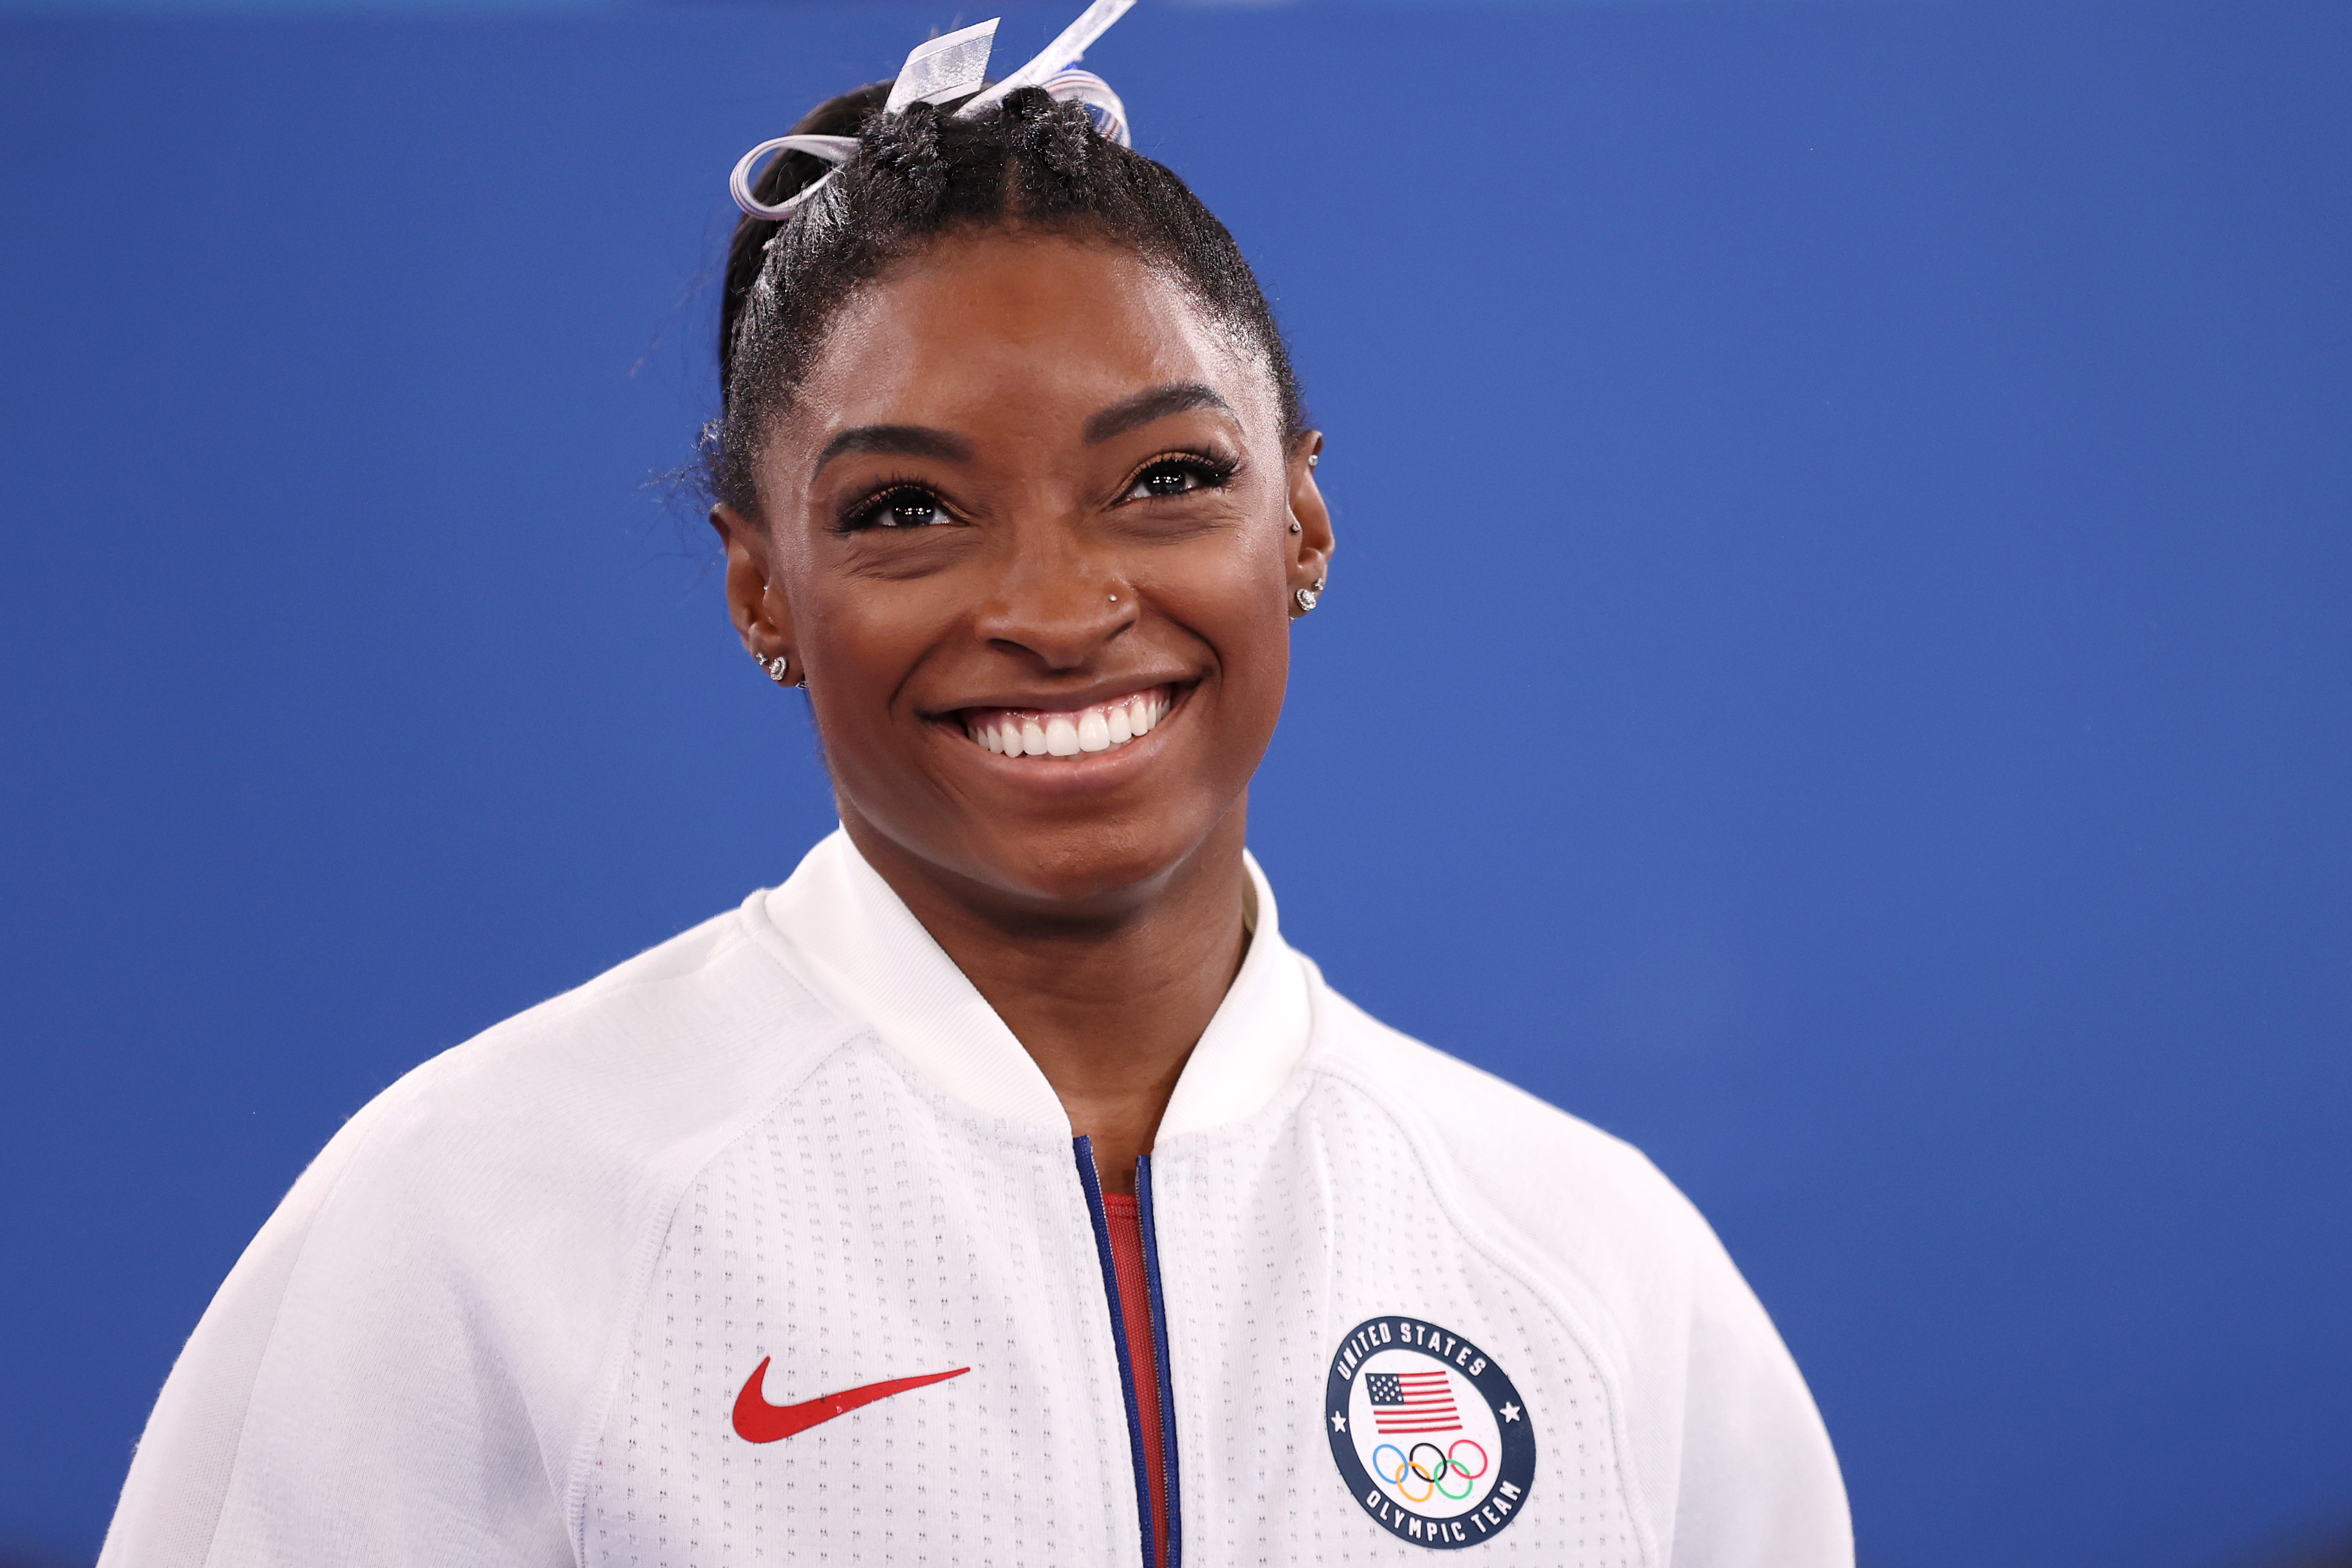 Simone Biles of Team United States during the Women's Team Final on day four of the Tokyo 2020 Olympic Games at Ariake Gymnastics Centre, on July 27, 2021, in Tokyo, Japan. | Source: Getty Images